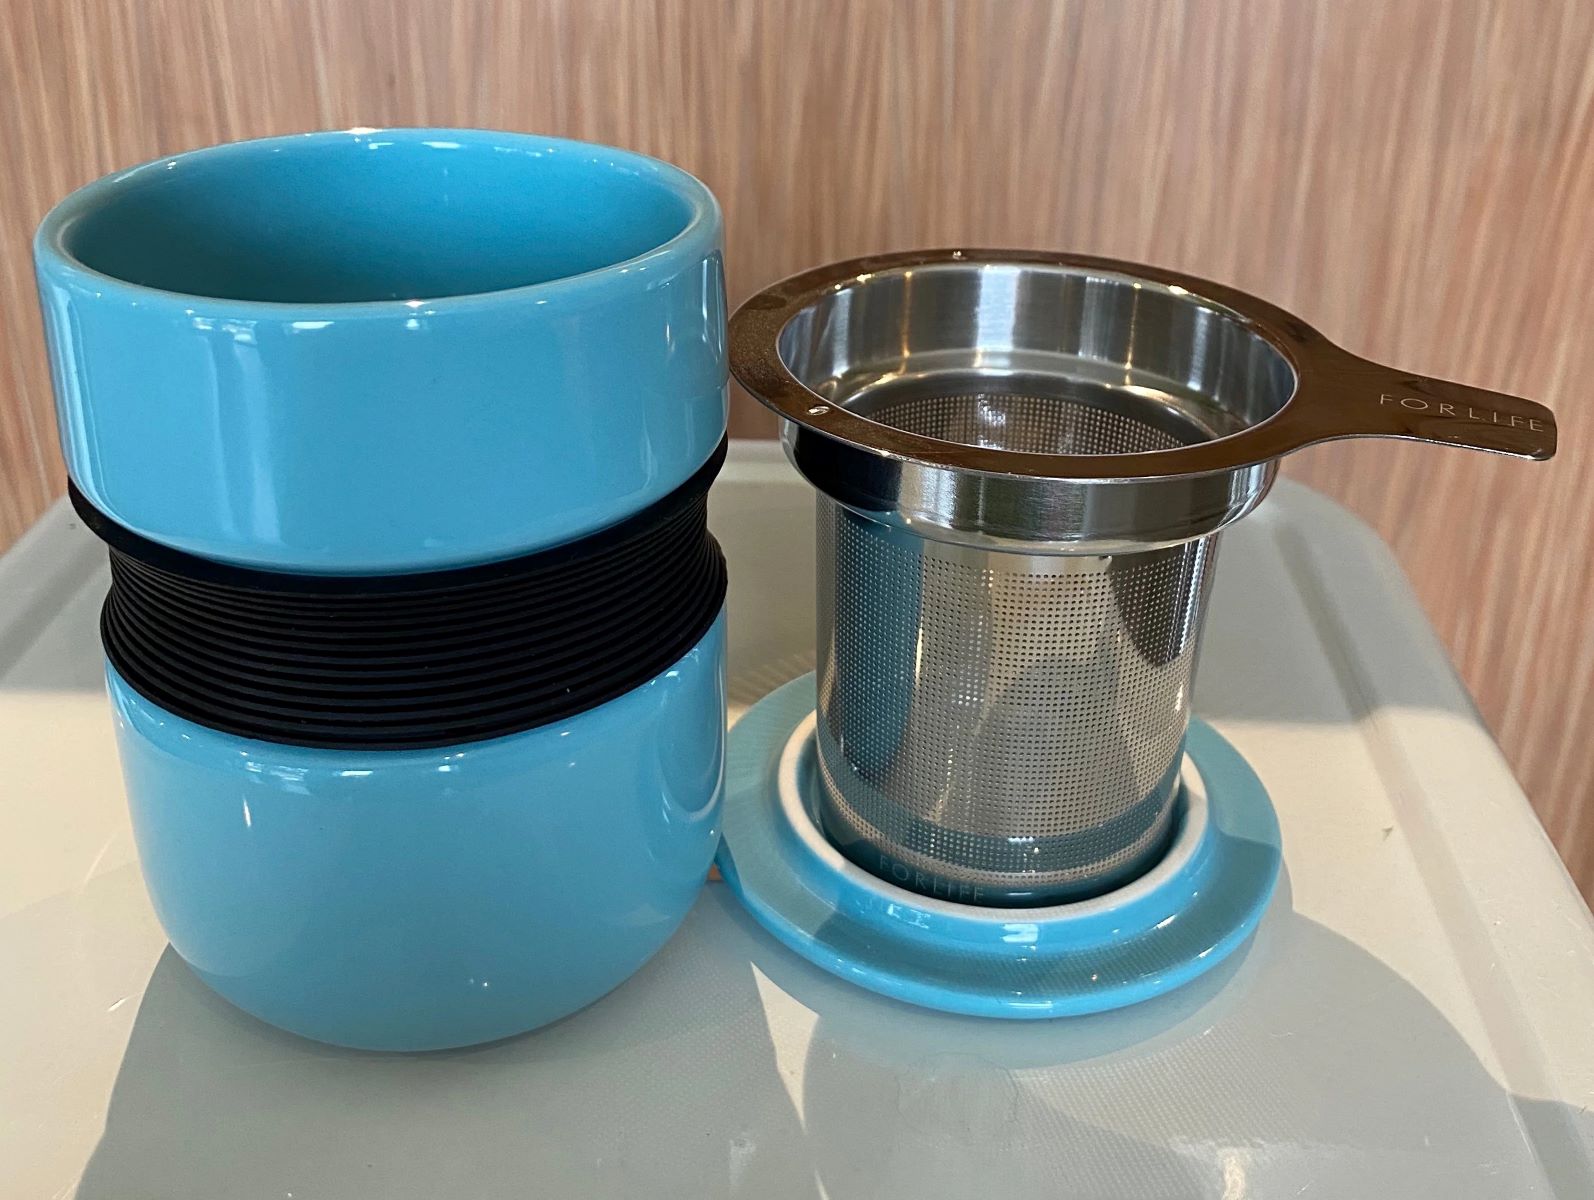 Tea Infuser Mug Review: A Must-Have for Tea Lovers